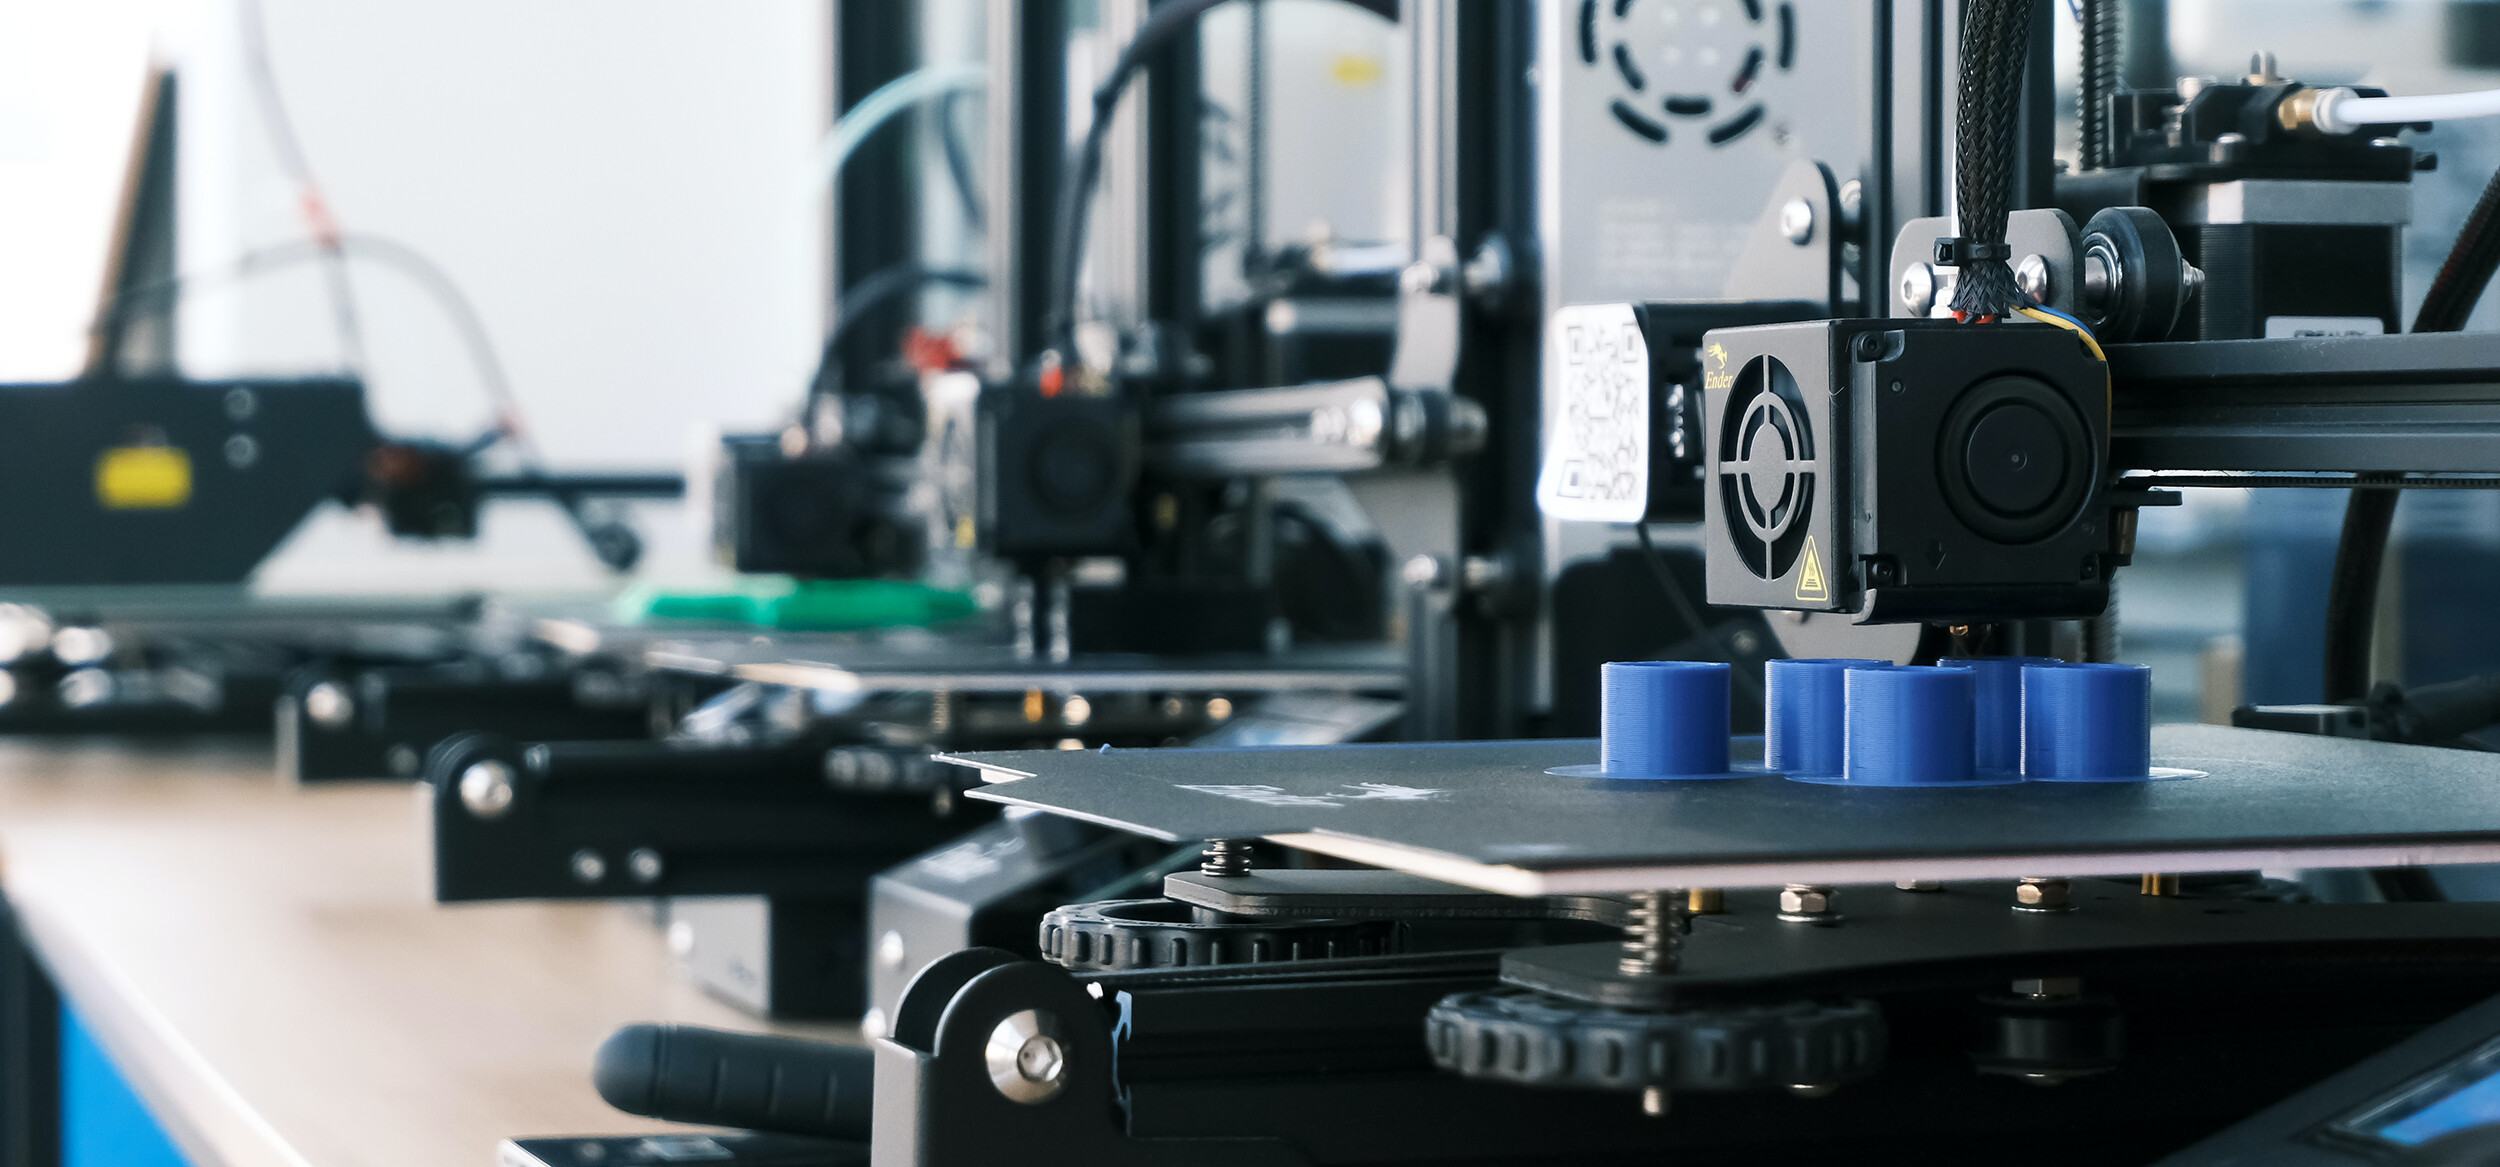 3D printing, or more accurately additive manufacturing, is an upcoming industry in Berlin.